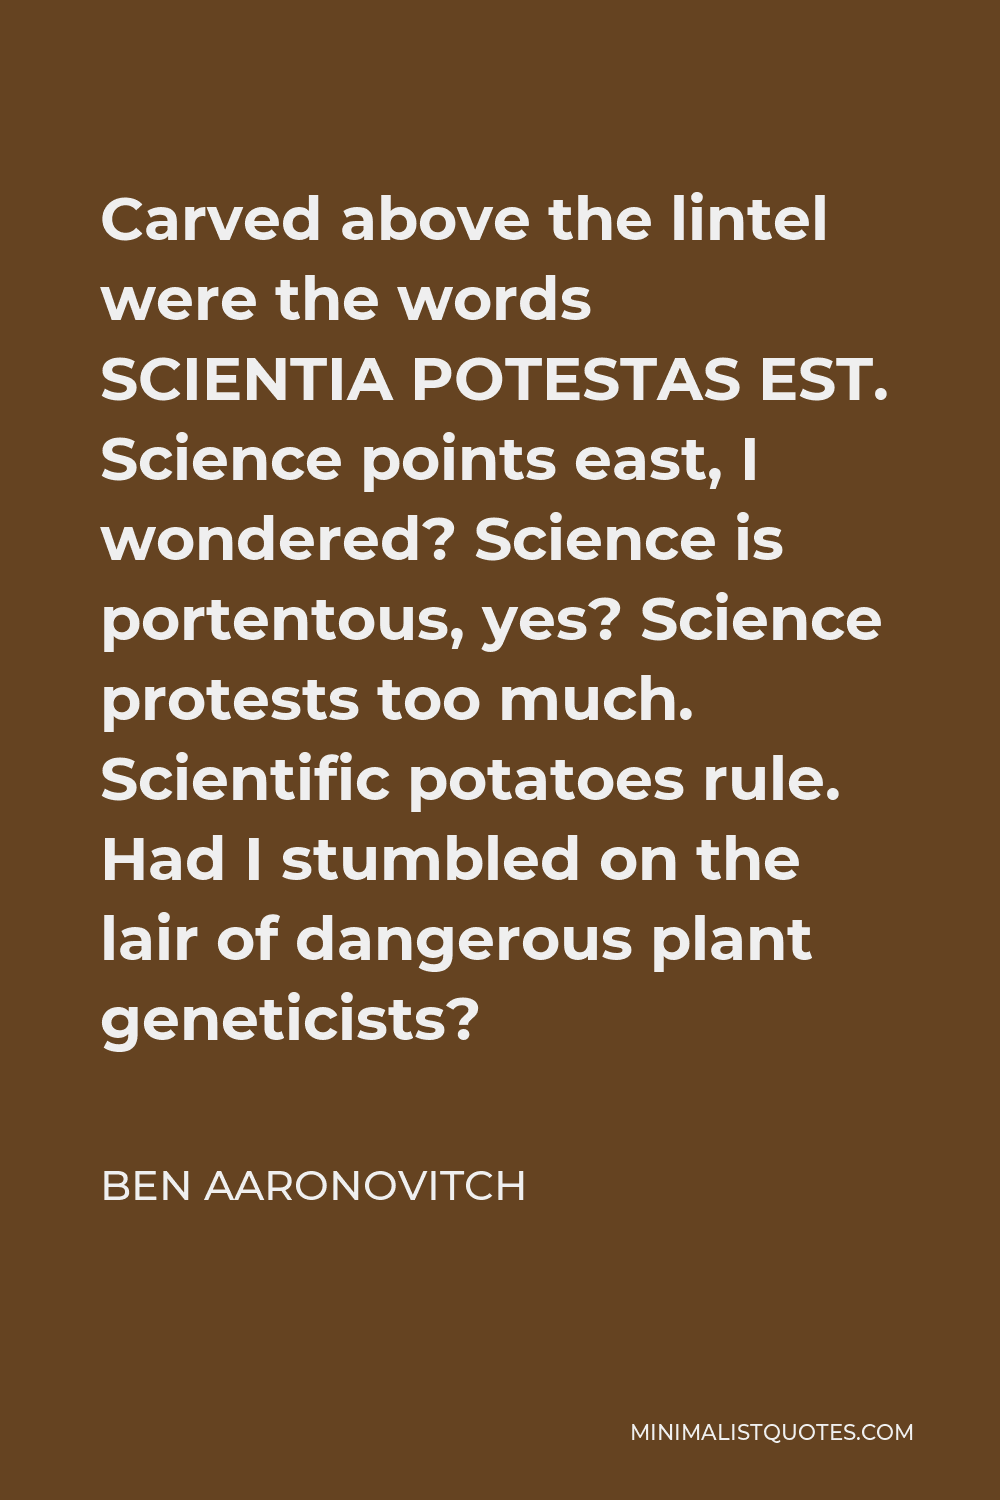 Ben Aaronovitch Quote - Carved above the lintel were the words SCIENTIA POTESTAS EST. Science points east, I wondered? Science is portentous, yes? Science protests too much. Scientific potatoes rule. Had I stumbled on the lair of dangerous plant geneticists?